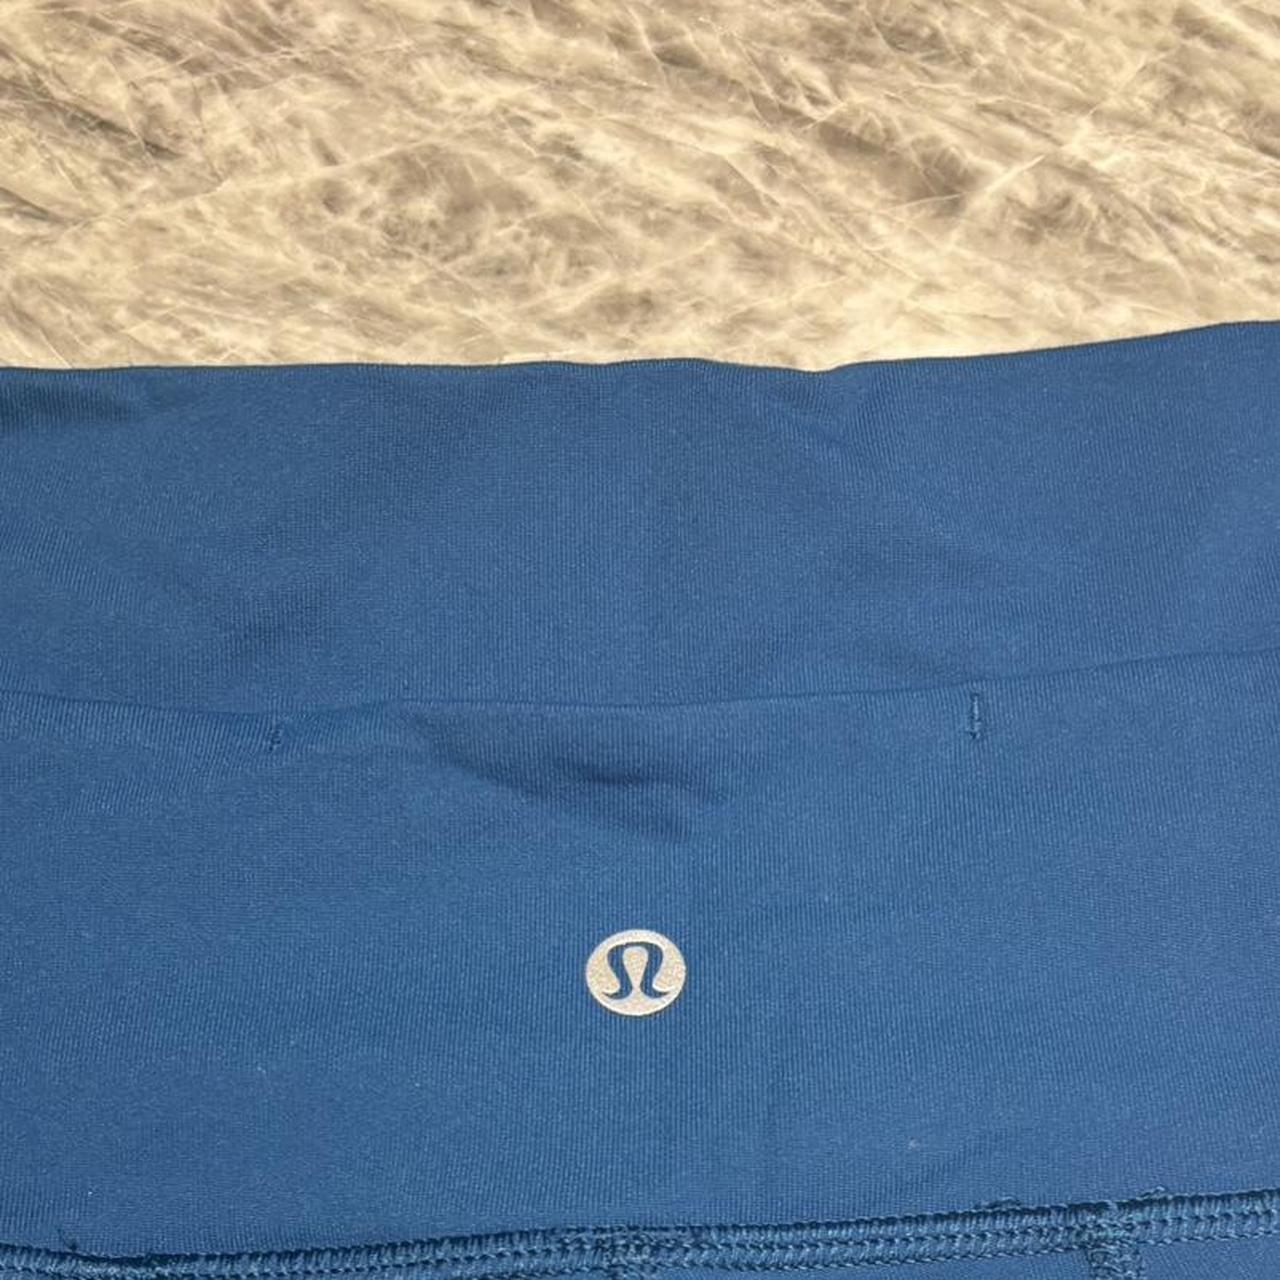 Like new lulu shorts Perfect for workout Pretty blue - Depop